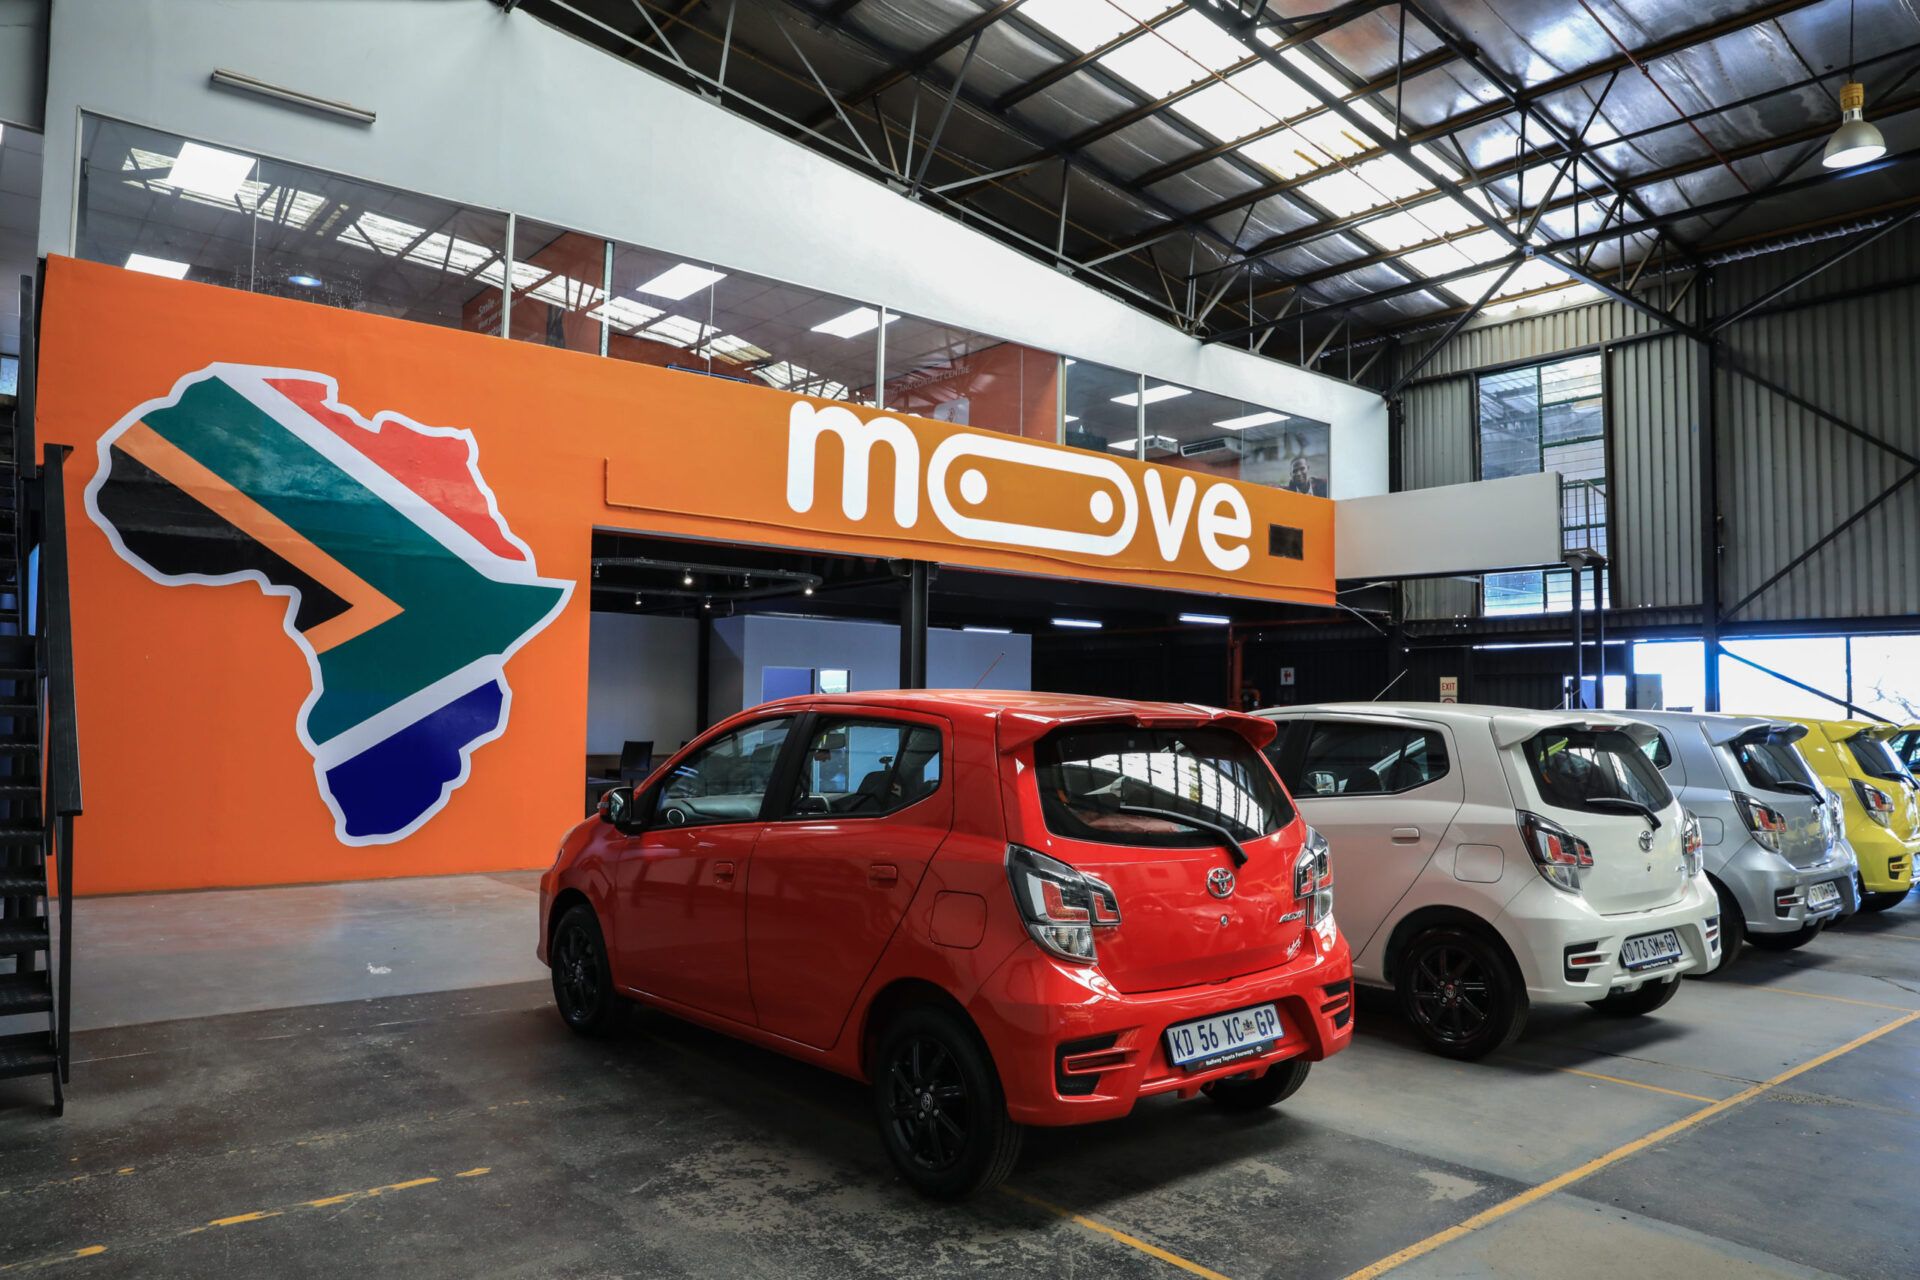 Nigerian Vehicle Financing Company, Moove Raises £15 Million, Aims at Reducing Carbon Emissions in the UK